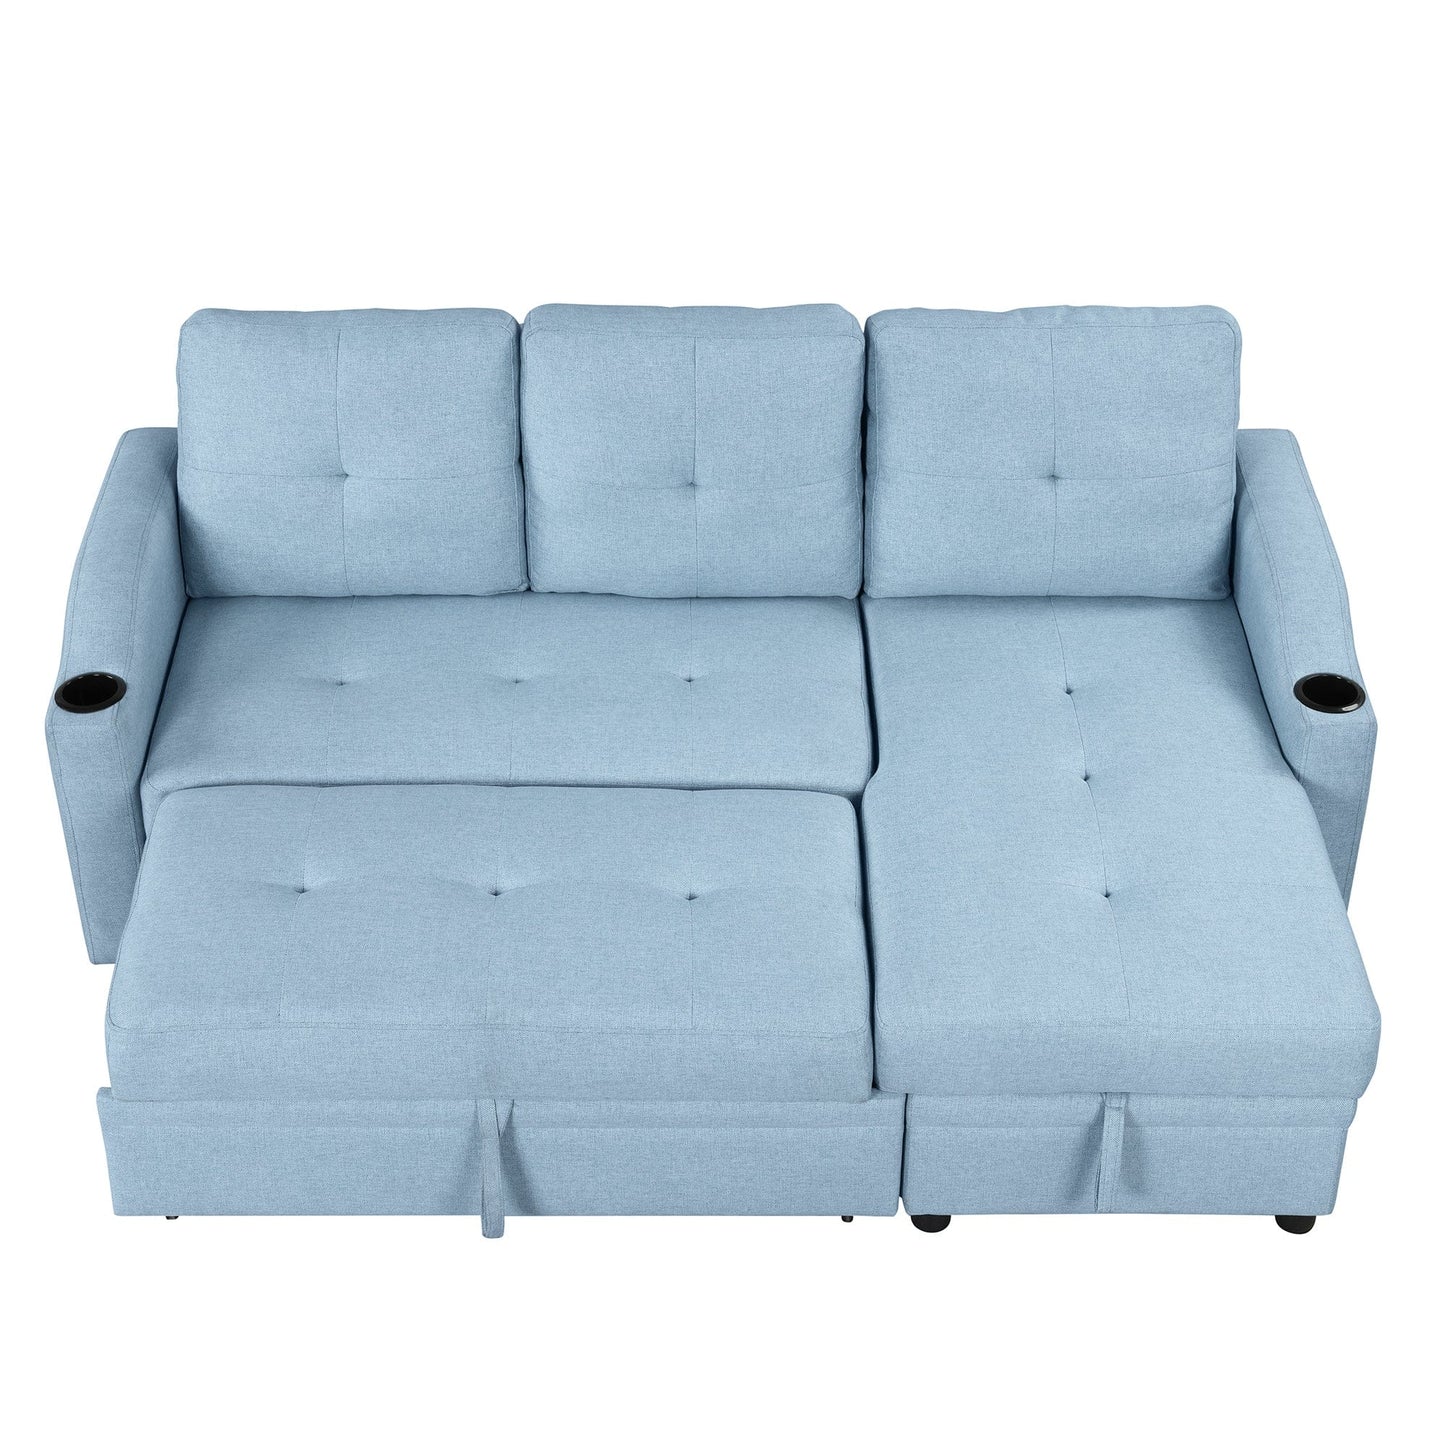 80.3" Orisfur. Pull Out Sofa Bed Modern Padded Upholstered Sofa Bed , Linen Fabric 3 Seater Couch with Storage Chaise and Cup Holder , Small Couch for Small Spaces